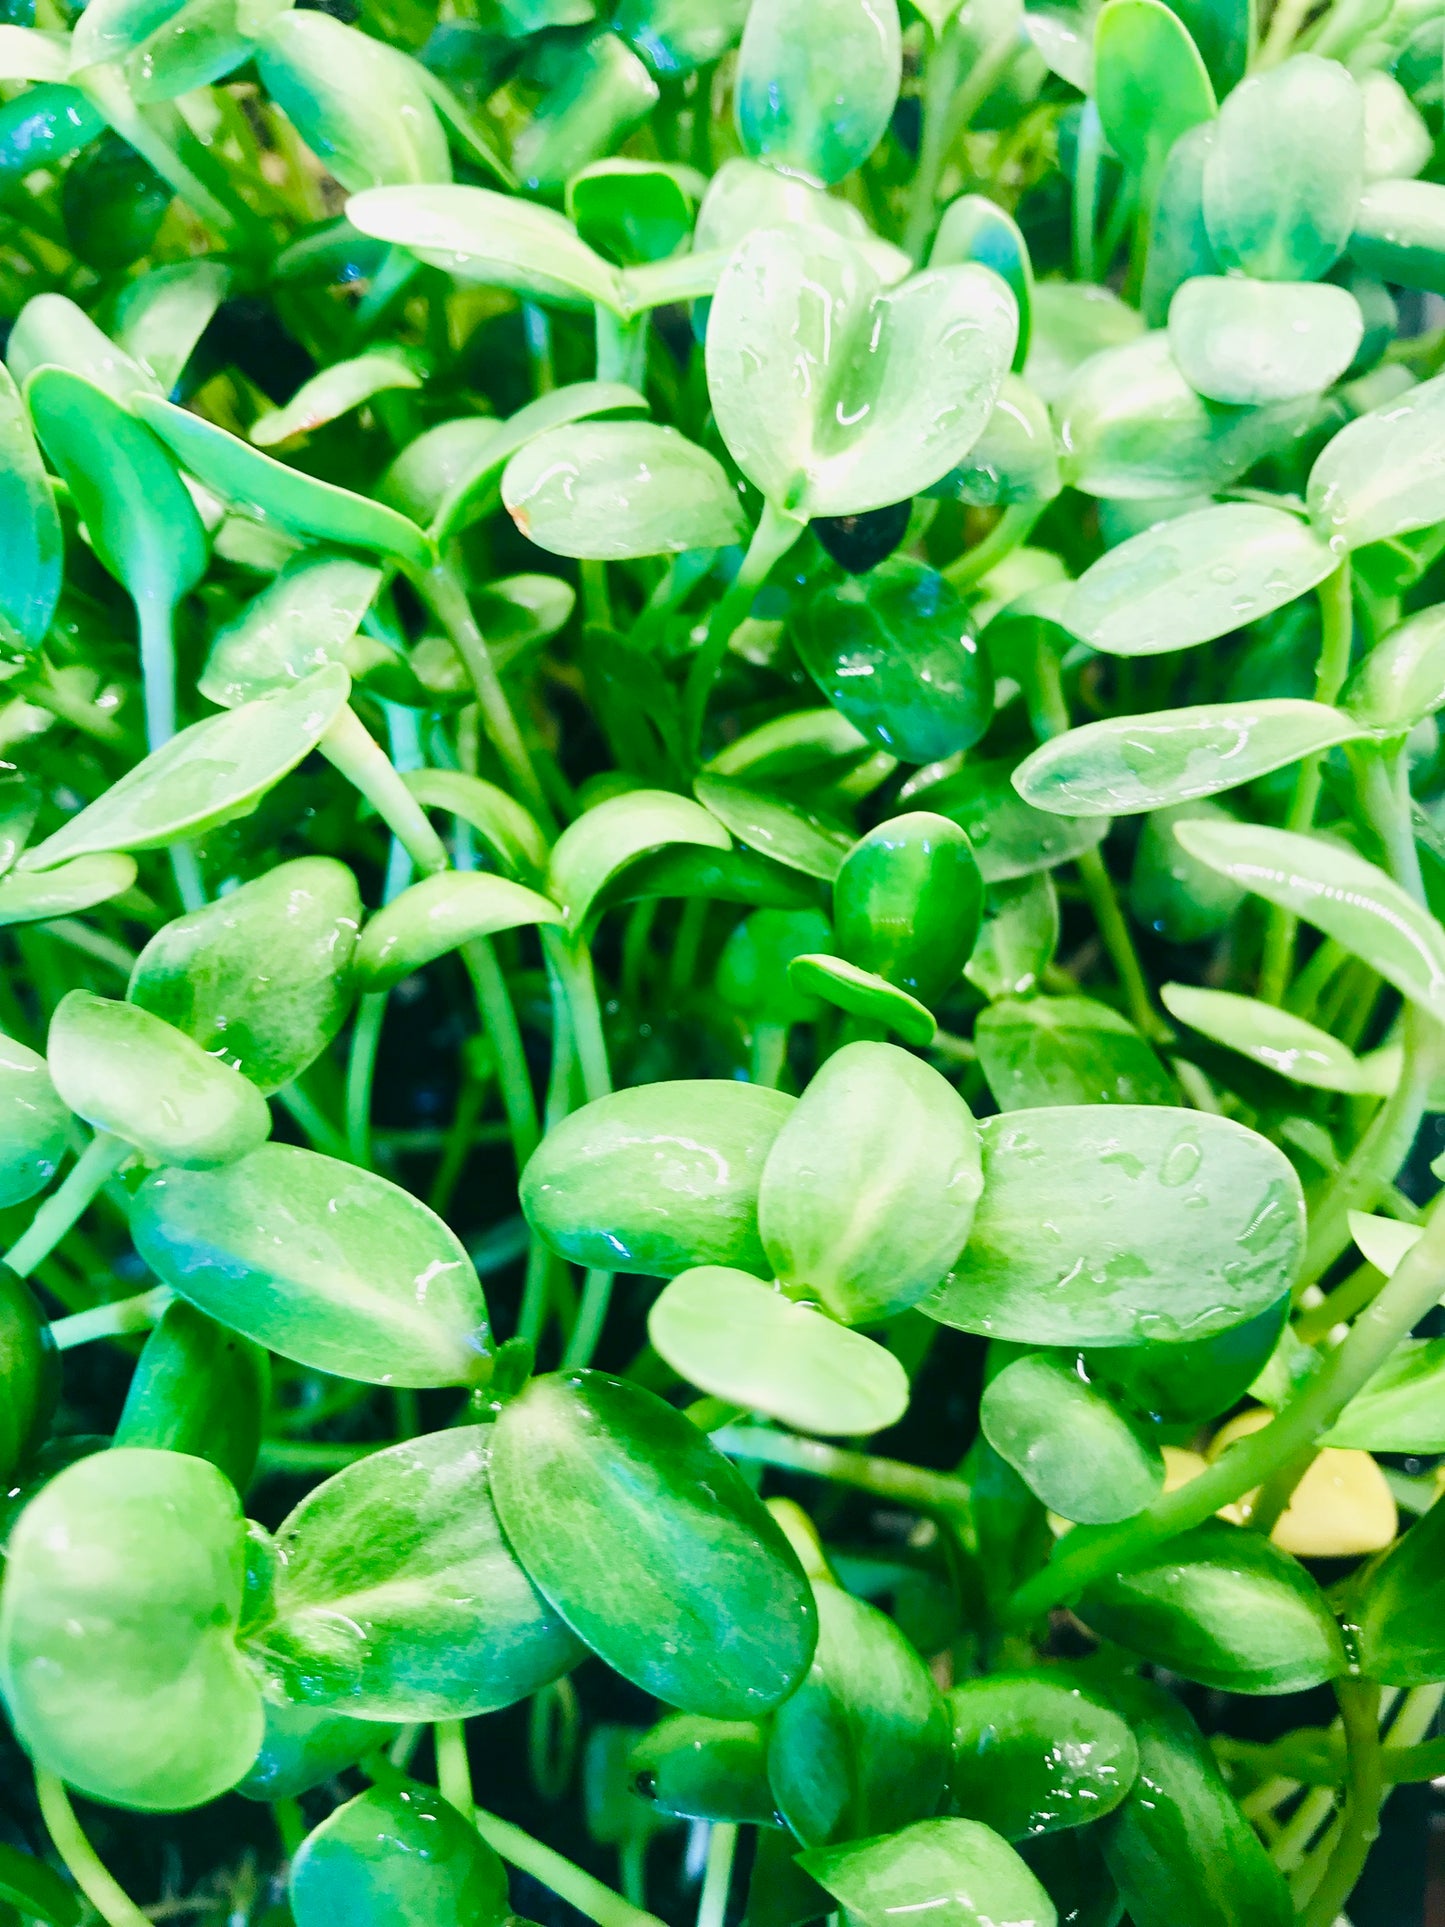 The Greens Lover Microgreens Subscription - Monthly